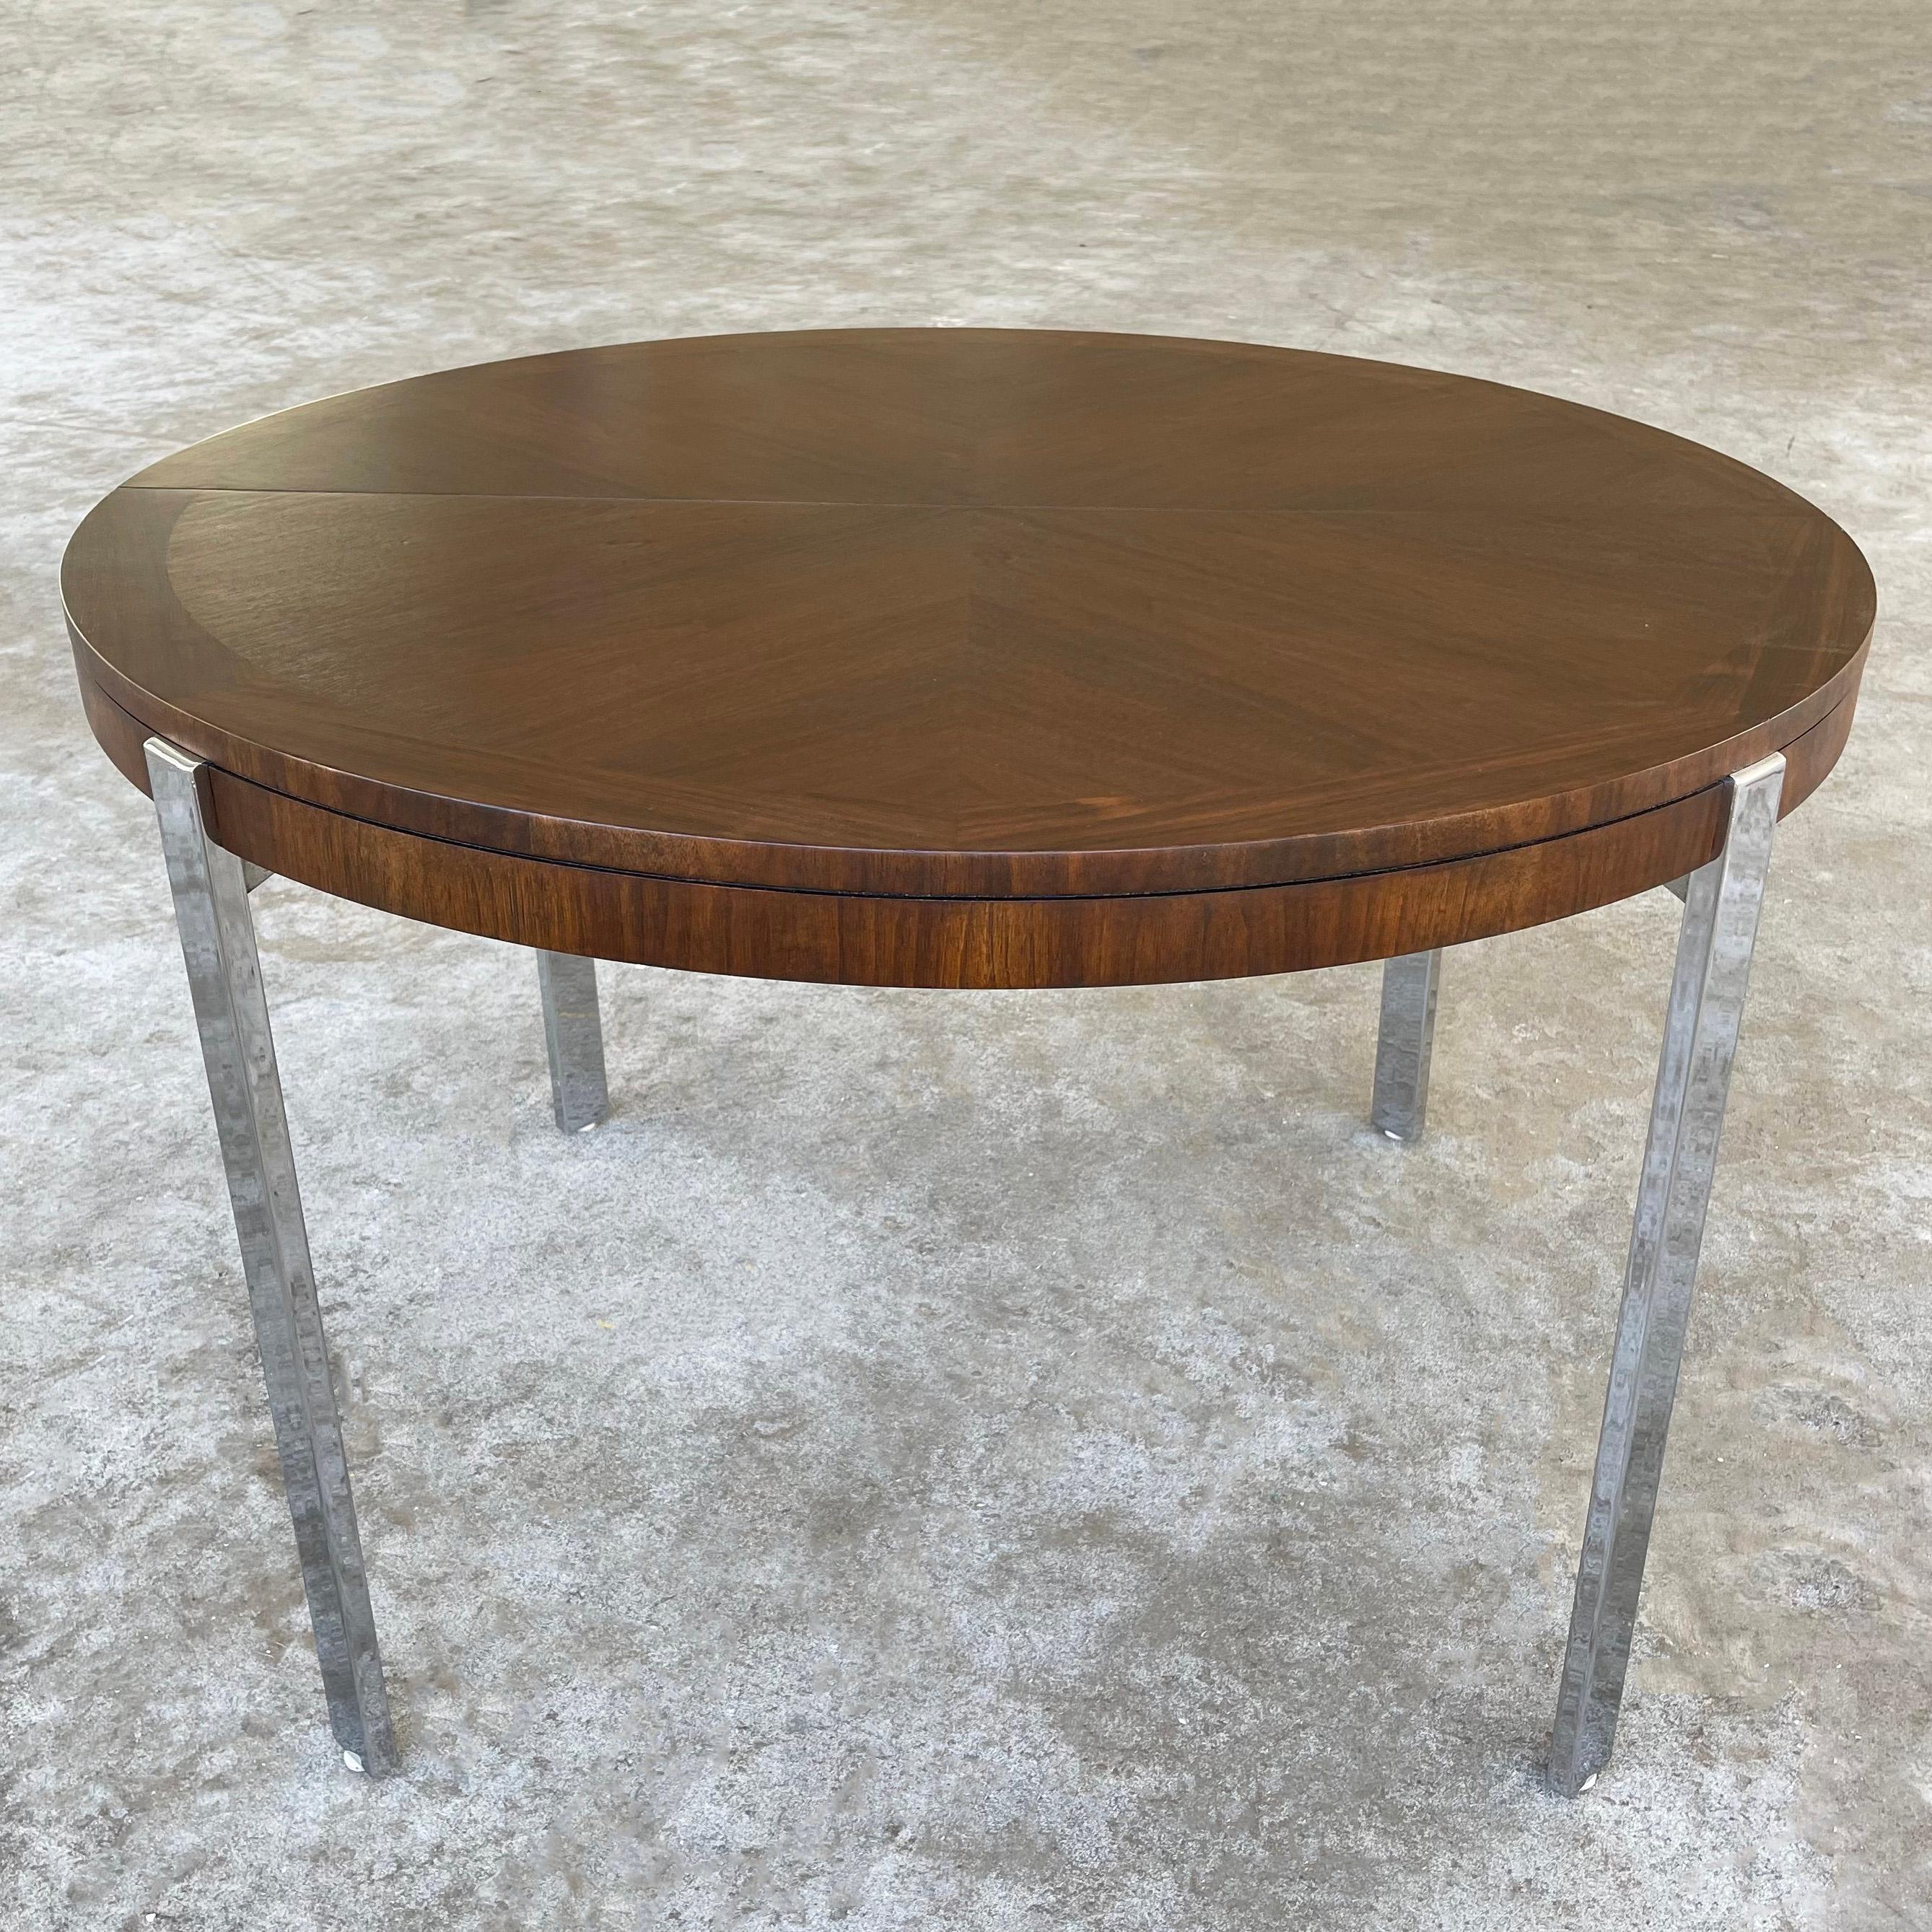 Sleek, mid-century modern, round, extension dining table by Lane Alta Vista features a bookmatched walnut top with contrasting trim on flat bar chrome legs. It's a wonderful combination of materials and subtle design elements. The table extends to